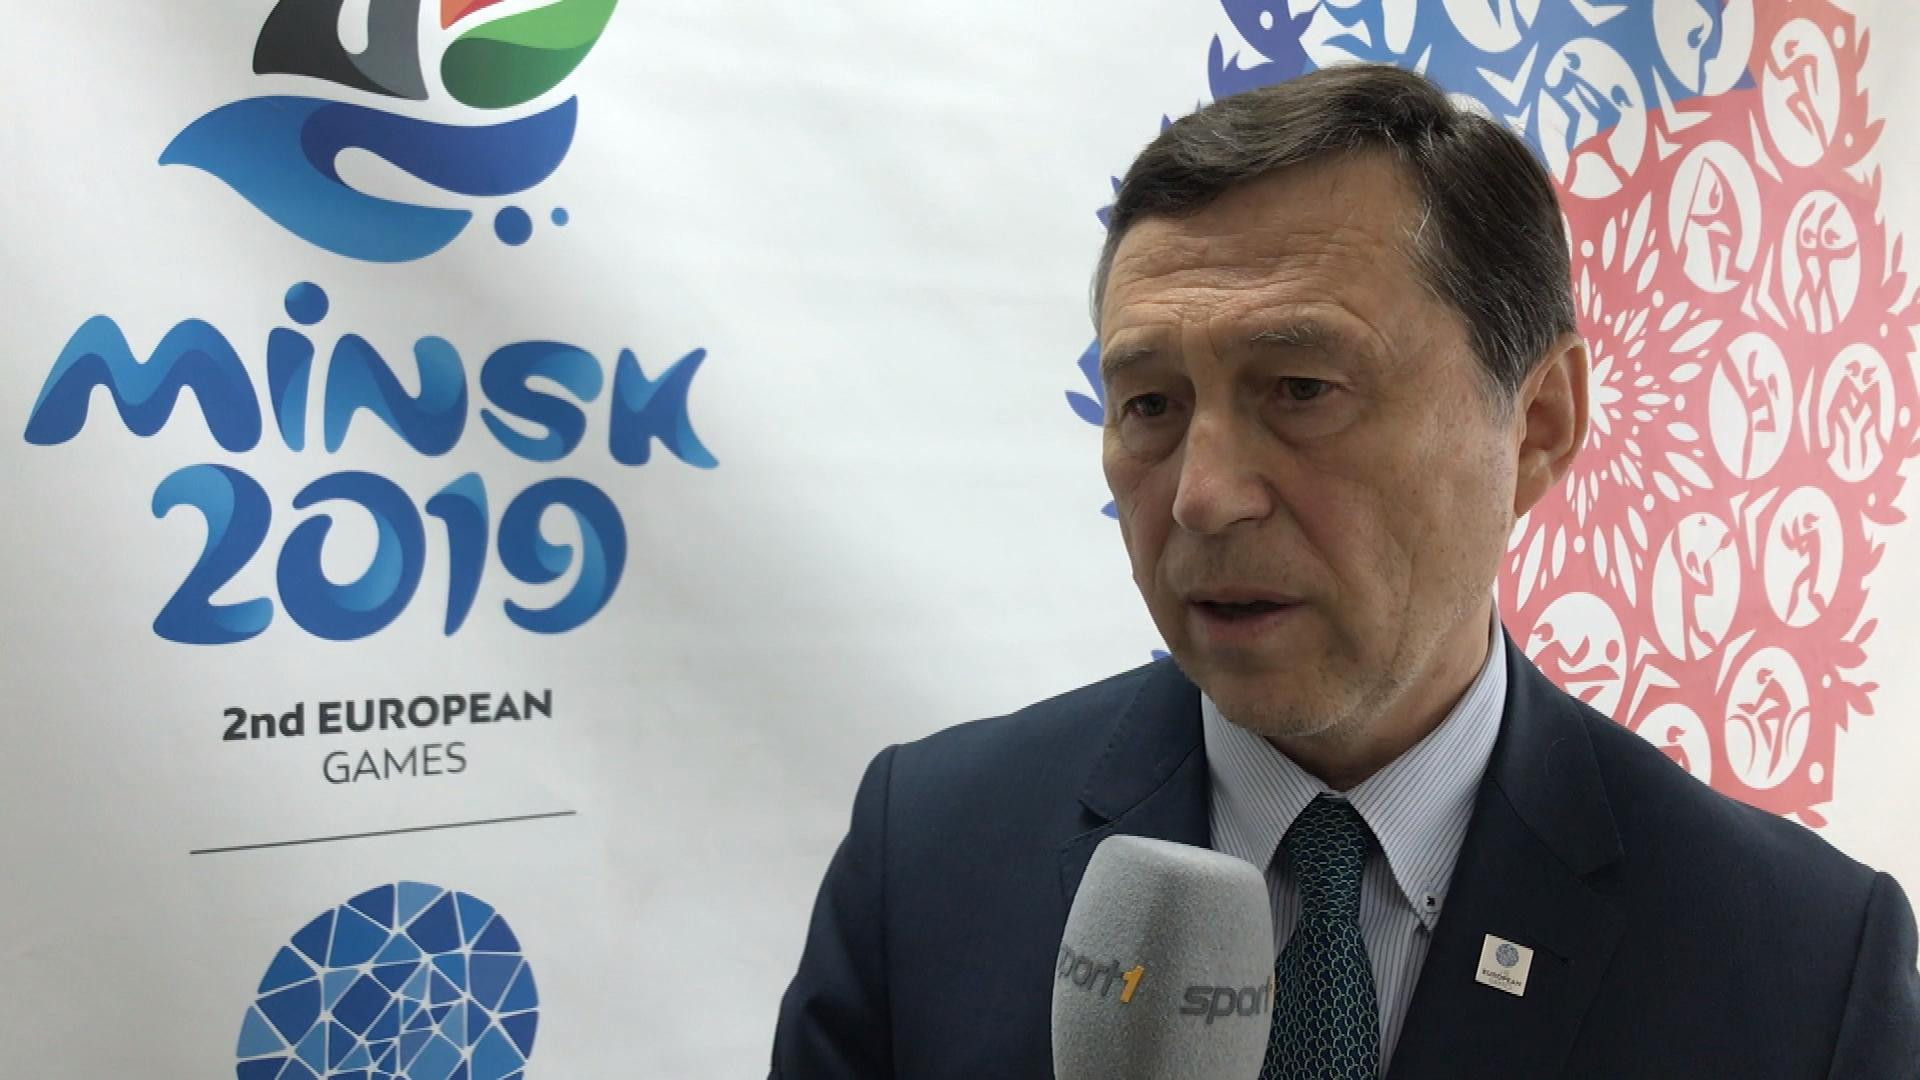 Polina Golovina replaces George Katulin, who had held the position since 2017 and was also chief executive of last year's successful European Games in Minsk ©Minsk 2019